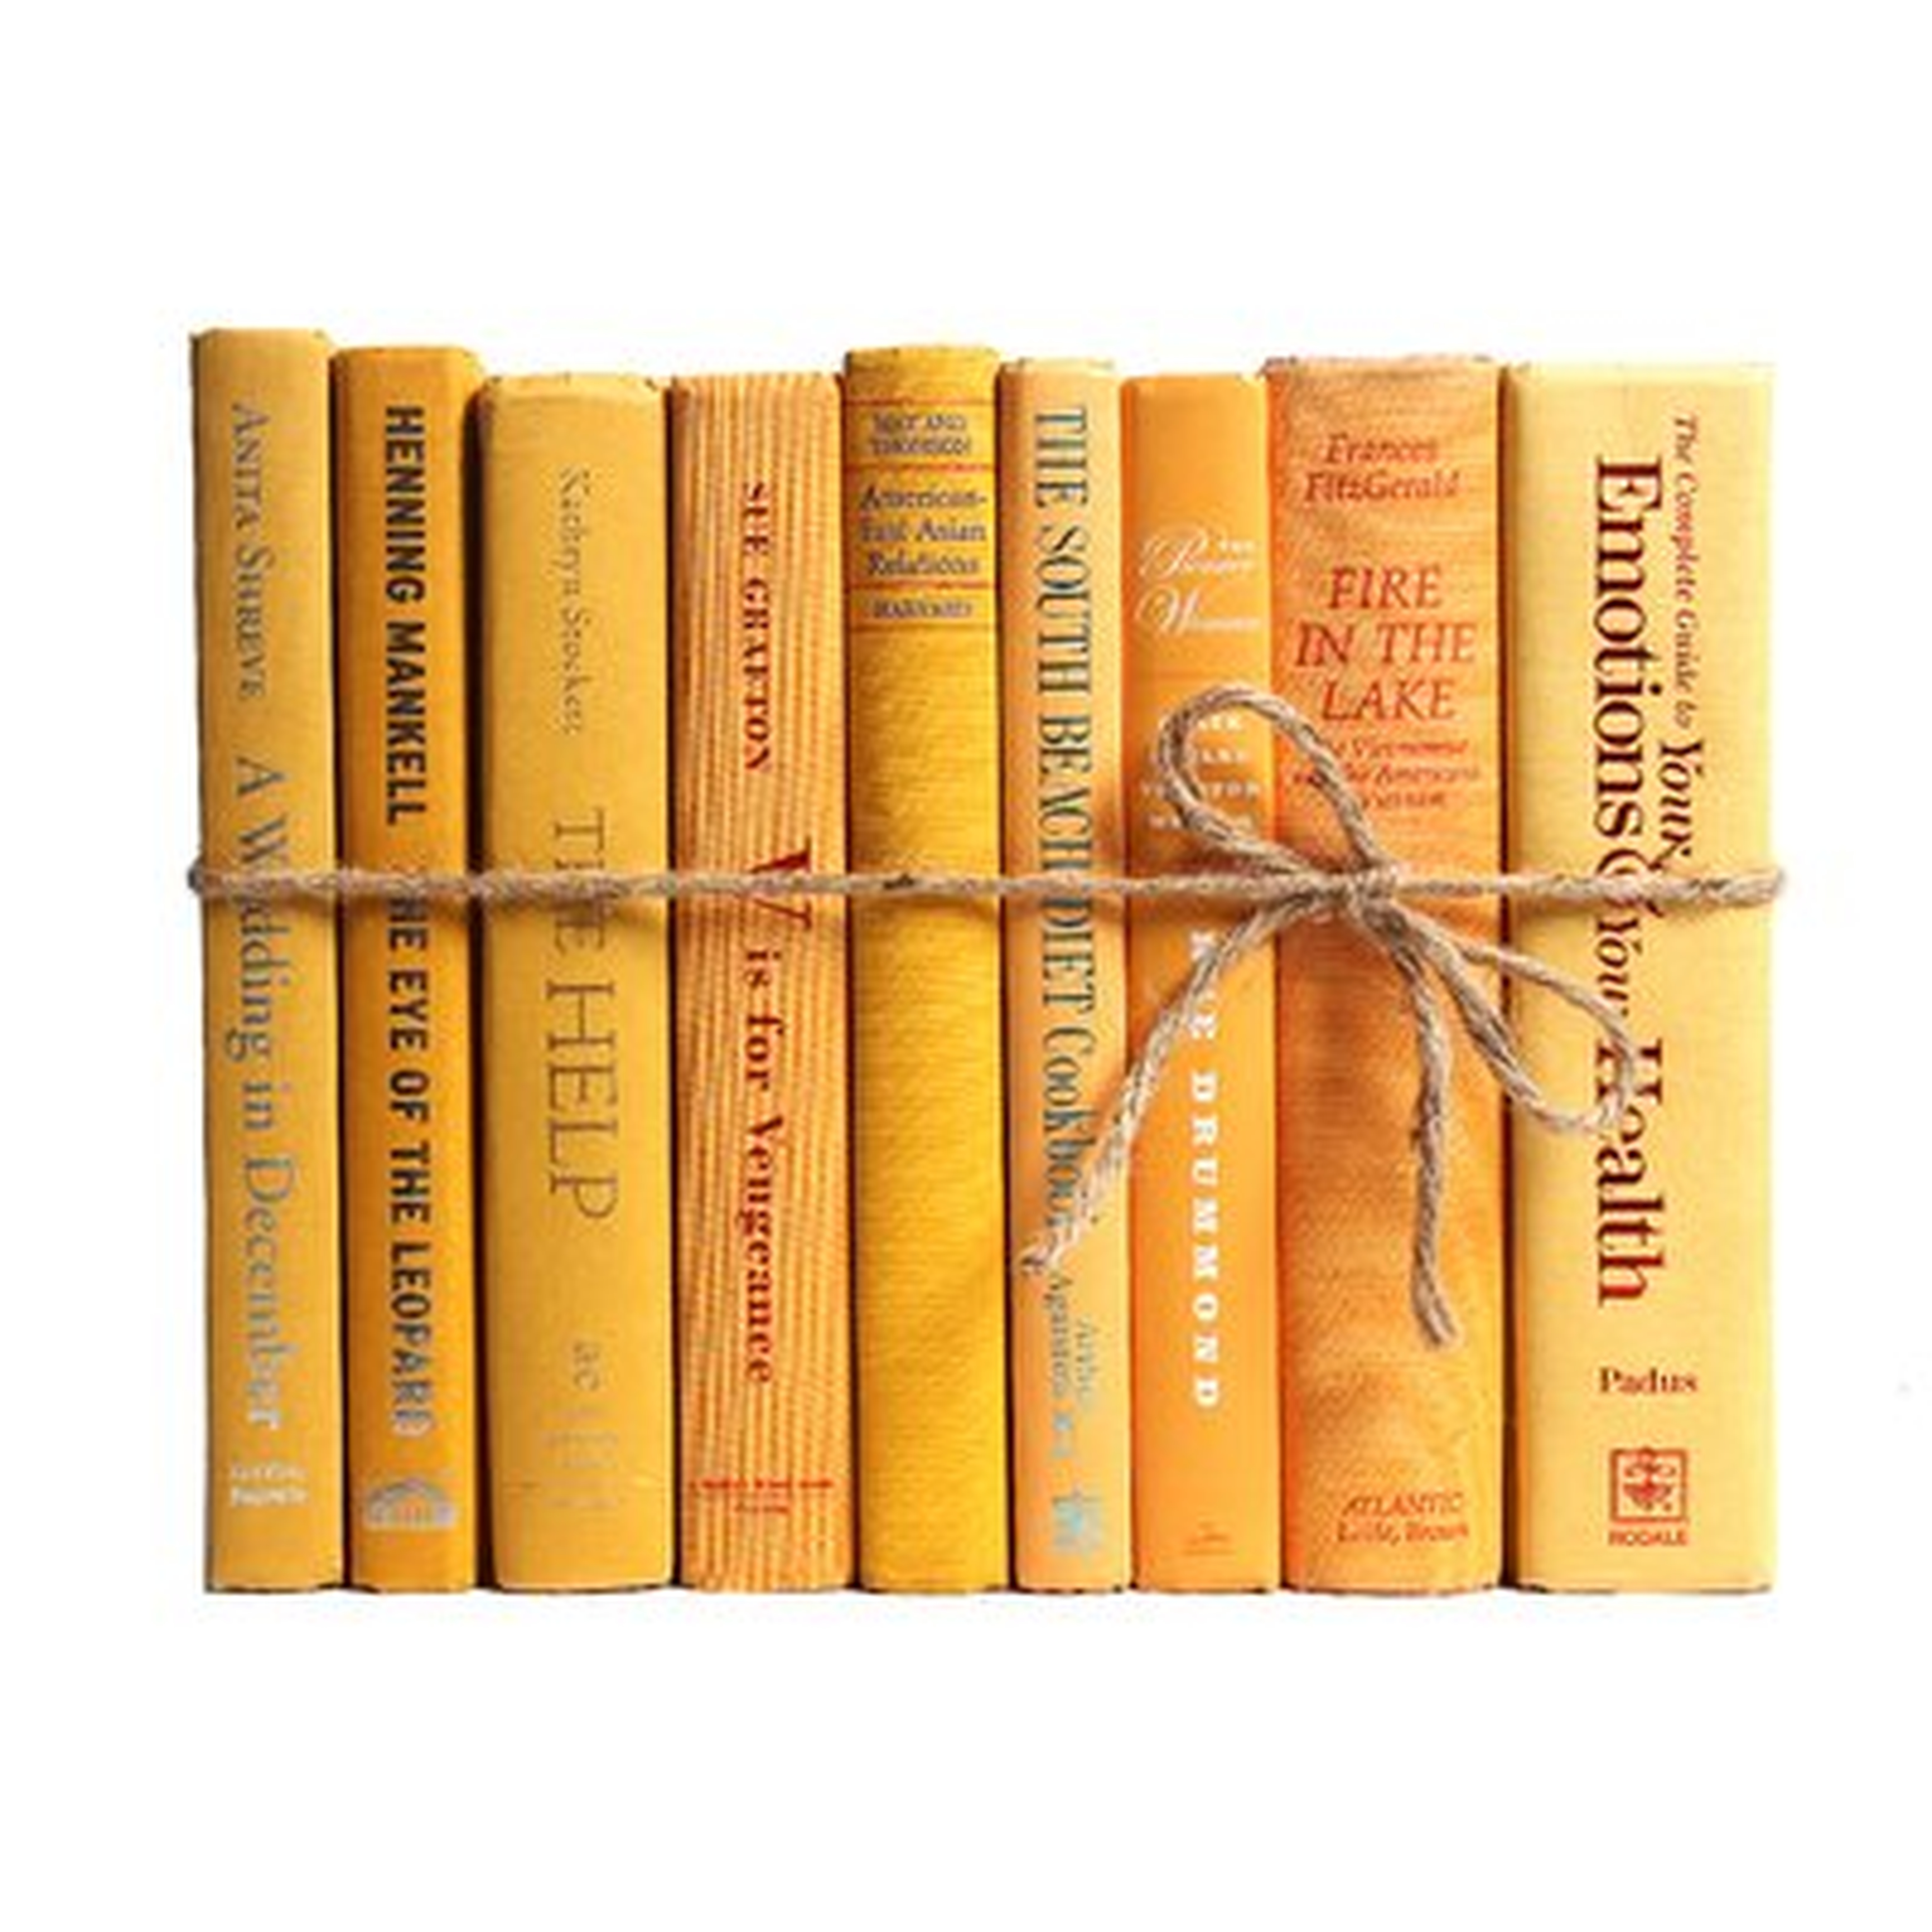 Authentic Decorative Books - By Color Modern Daffodil ColorPak (1 Linear Foot, 10-12 Books) - Wayfair